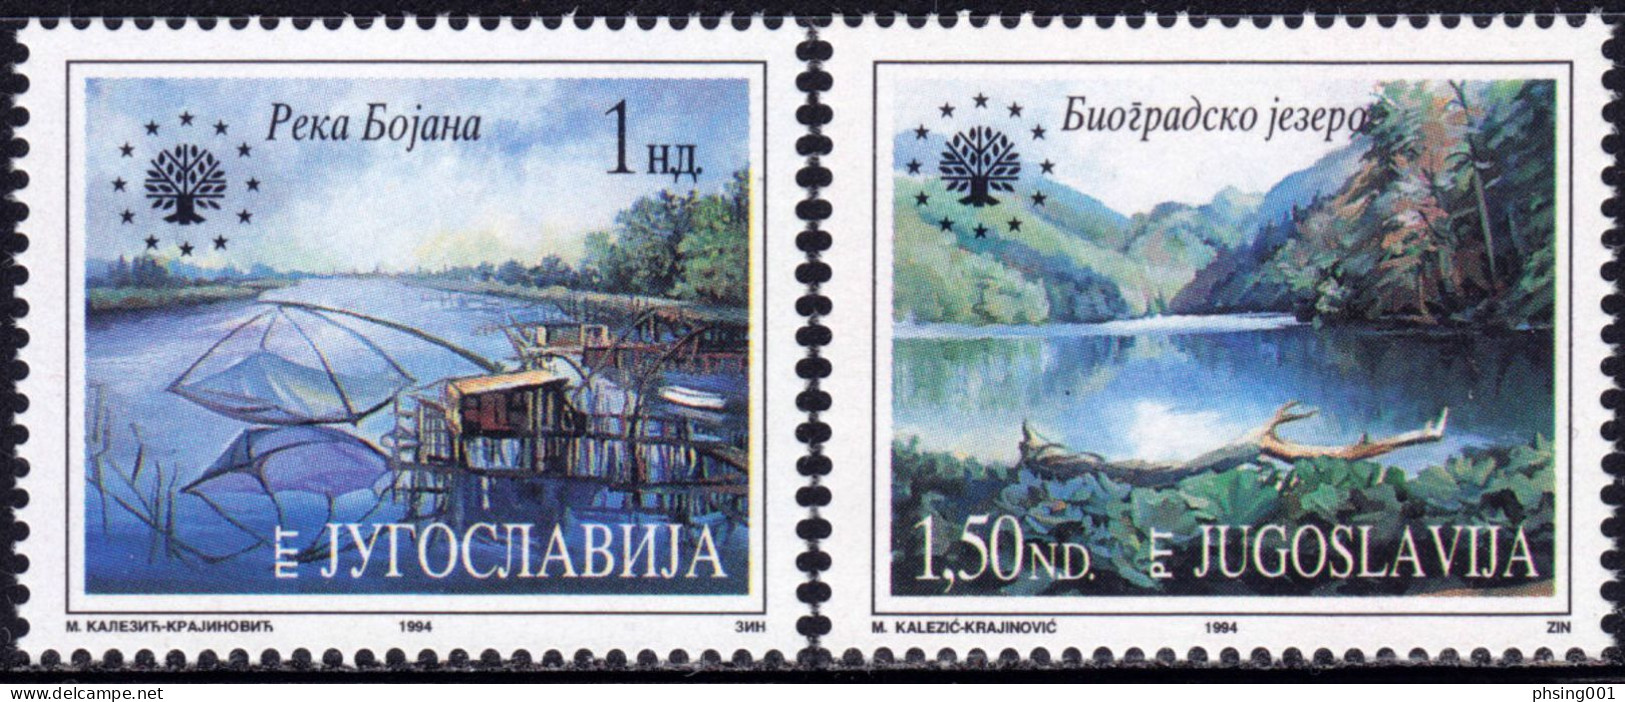 Yugoslavia 1994 Europa CEPT Dogs Birds Eagles Ship in the bottle Winter Olympic Games Lillehammer, Complete Year MNH